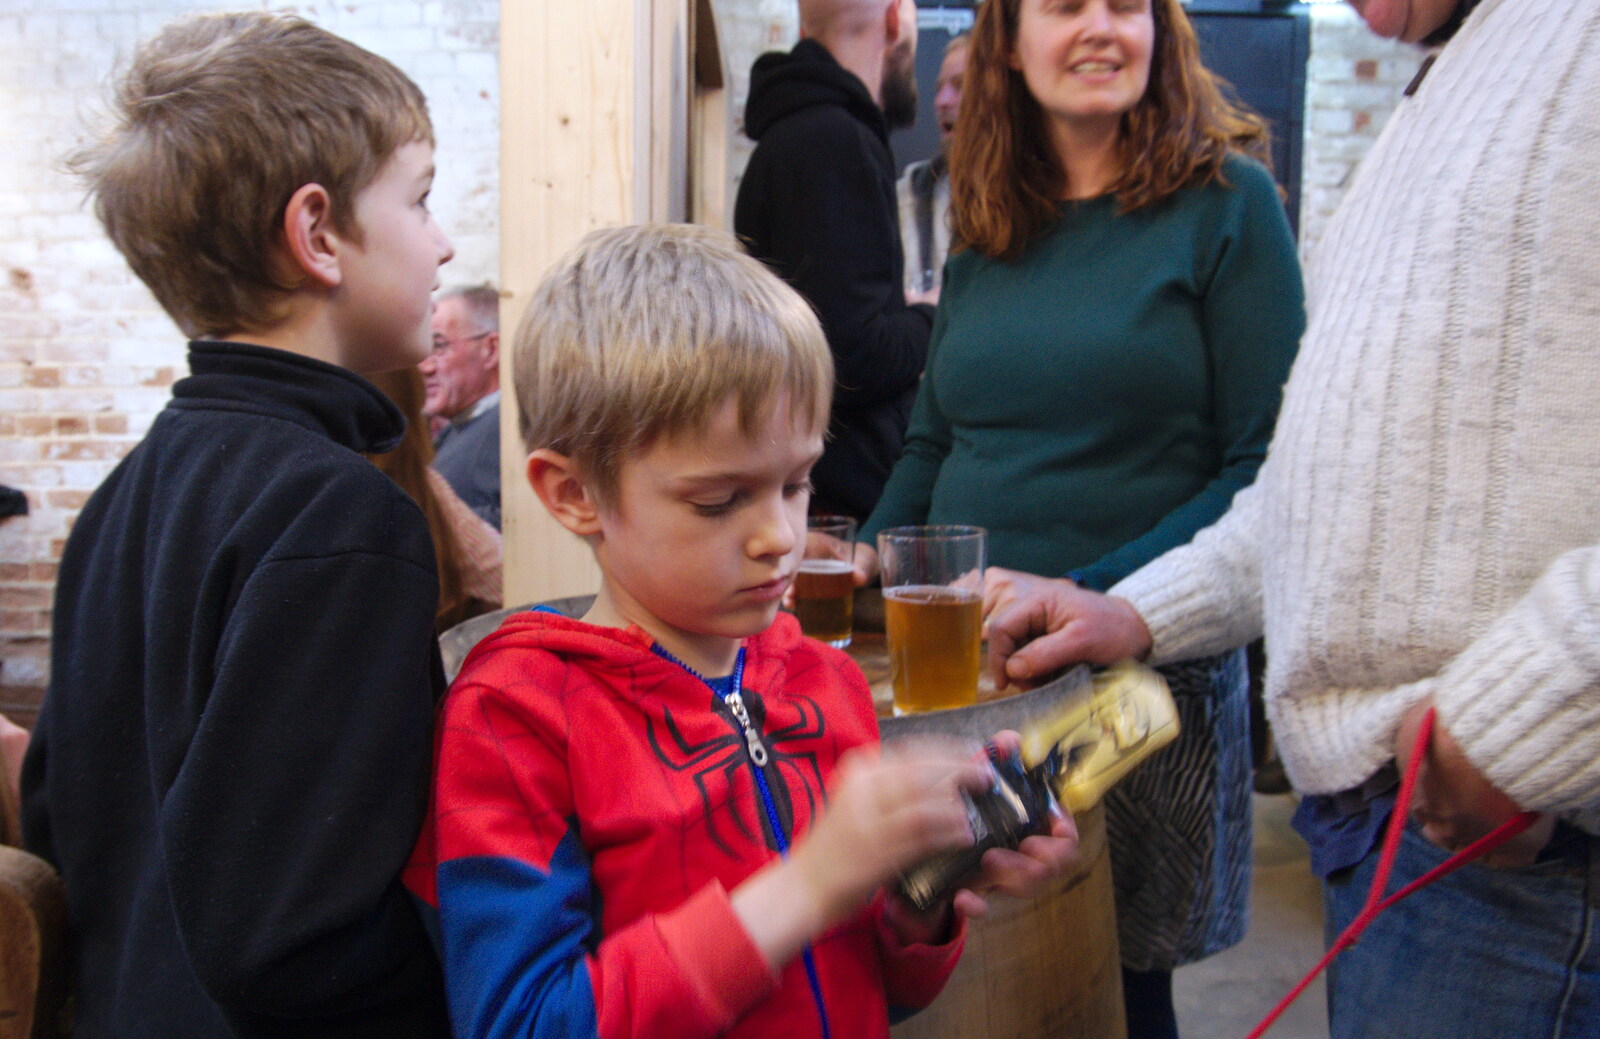 Harry plays with something from The Opening of Star Wing Brewery's Tap Room, Redgrave, Suffolk - 4th May 2019